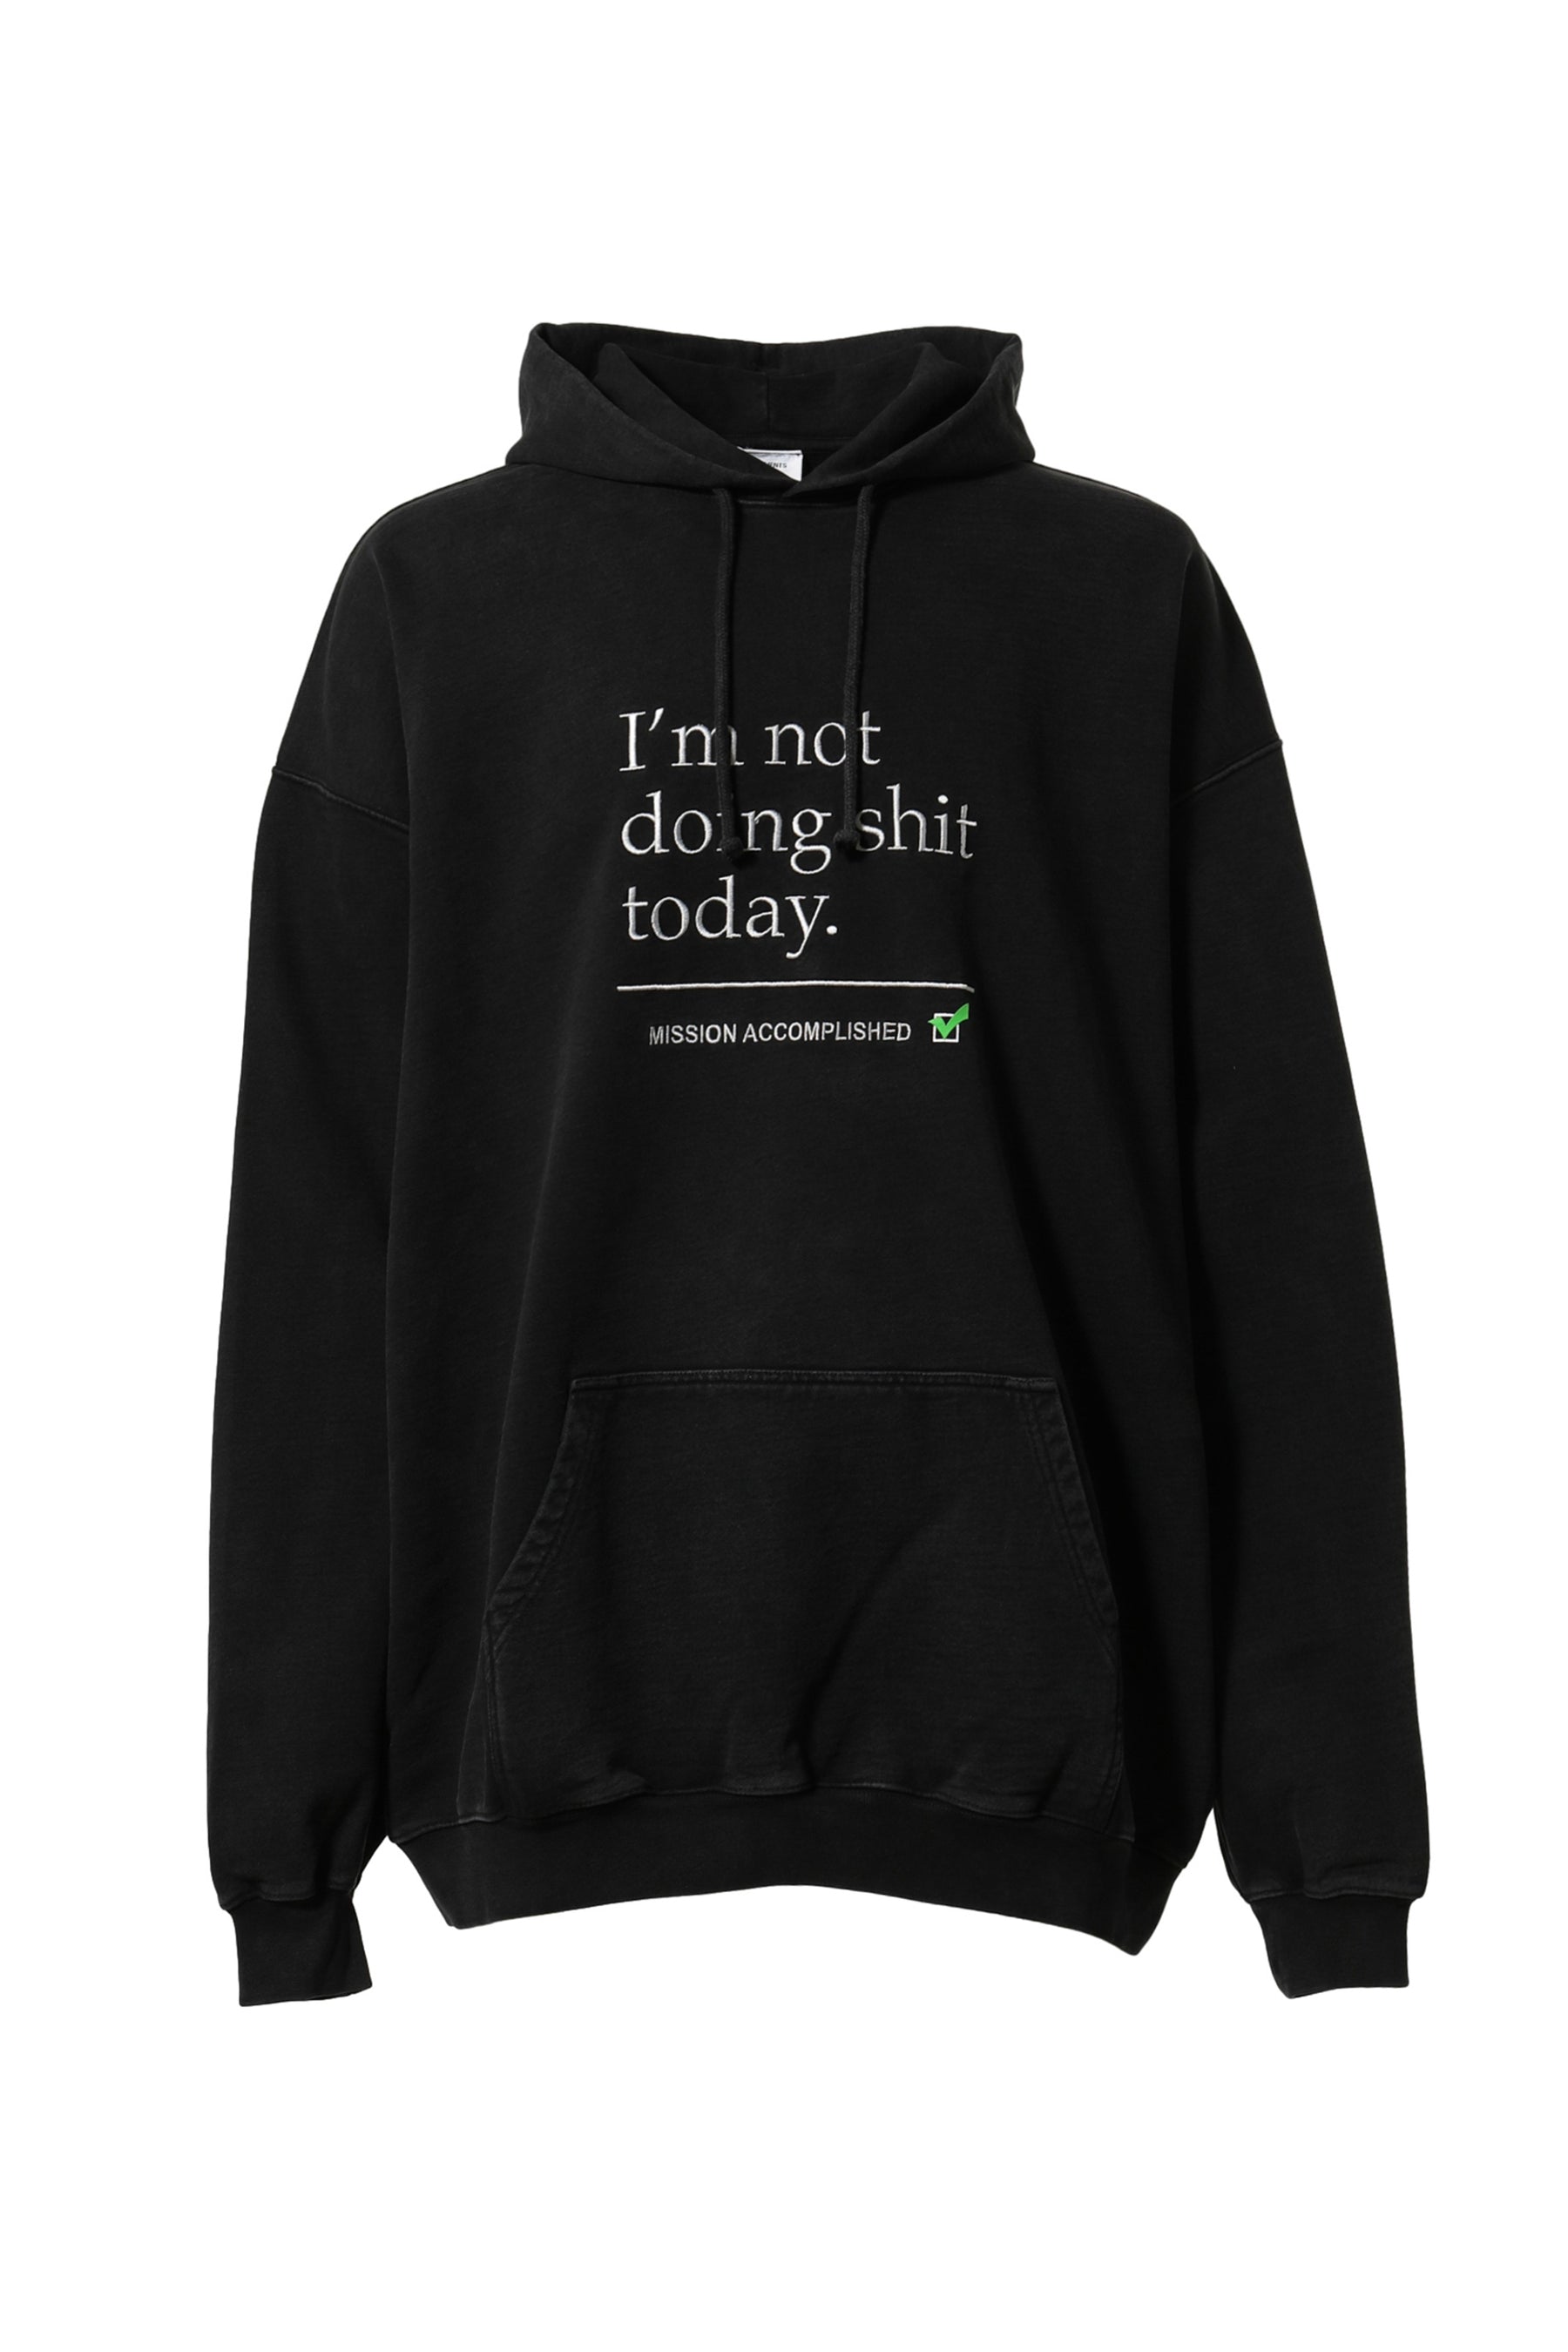 VETEMENTS ヴェトモン FW23 NOT DOING SHIT TODAY HOODIE / WASHED BLK ...